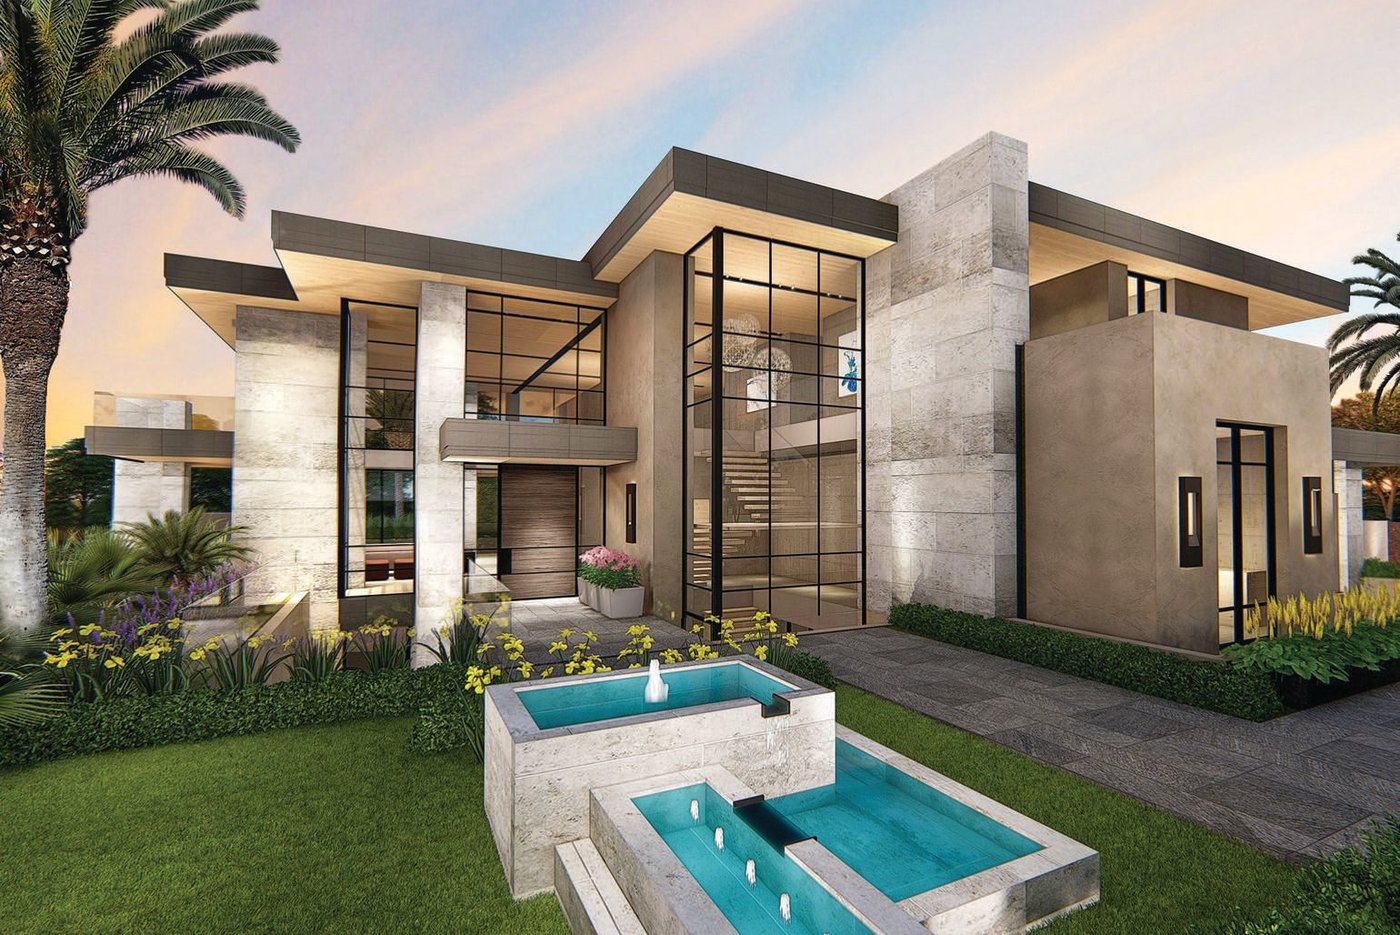 The clean-lined, two-story RC-4 modern-style residence PHOTO COURTESY OF THE RITZ-CARLTON RESIDENCES, PARADISE VALLEY, THE PALMERAIE